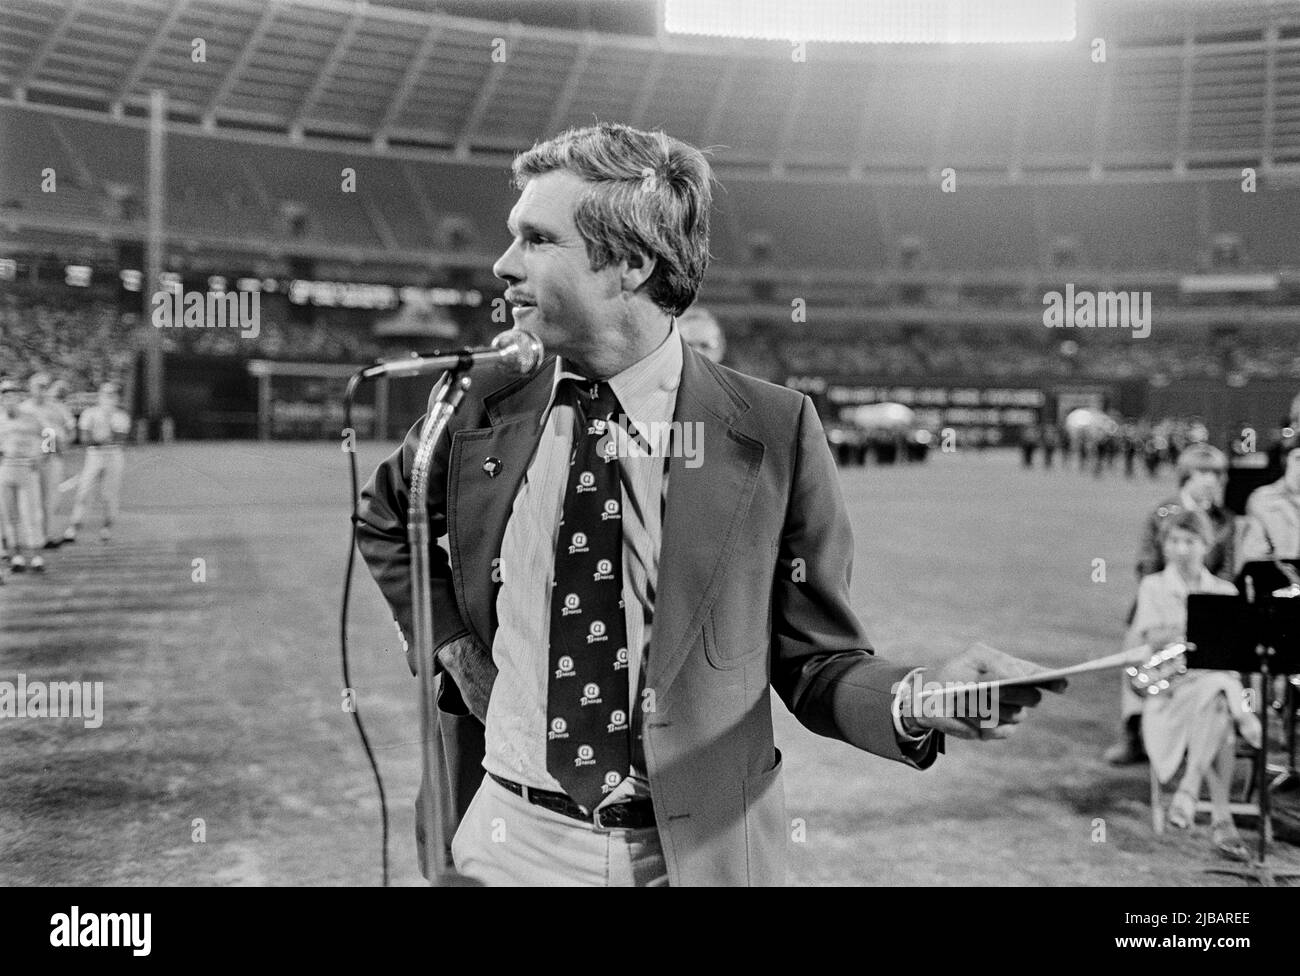 Wealthy cable television magnate and (later) CNN founder Ted Turner appears on the baseball field at Atlanta-Fulton County stadium with Atlanta Braves manager Dave Bristol after buying the Braves in 1976. Stock Photo